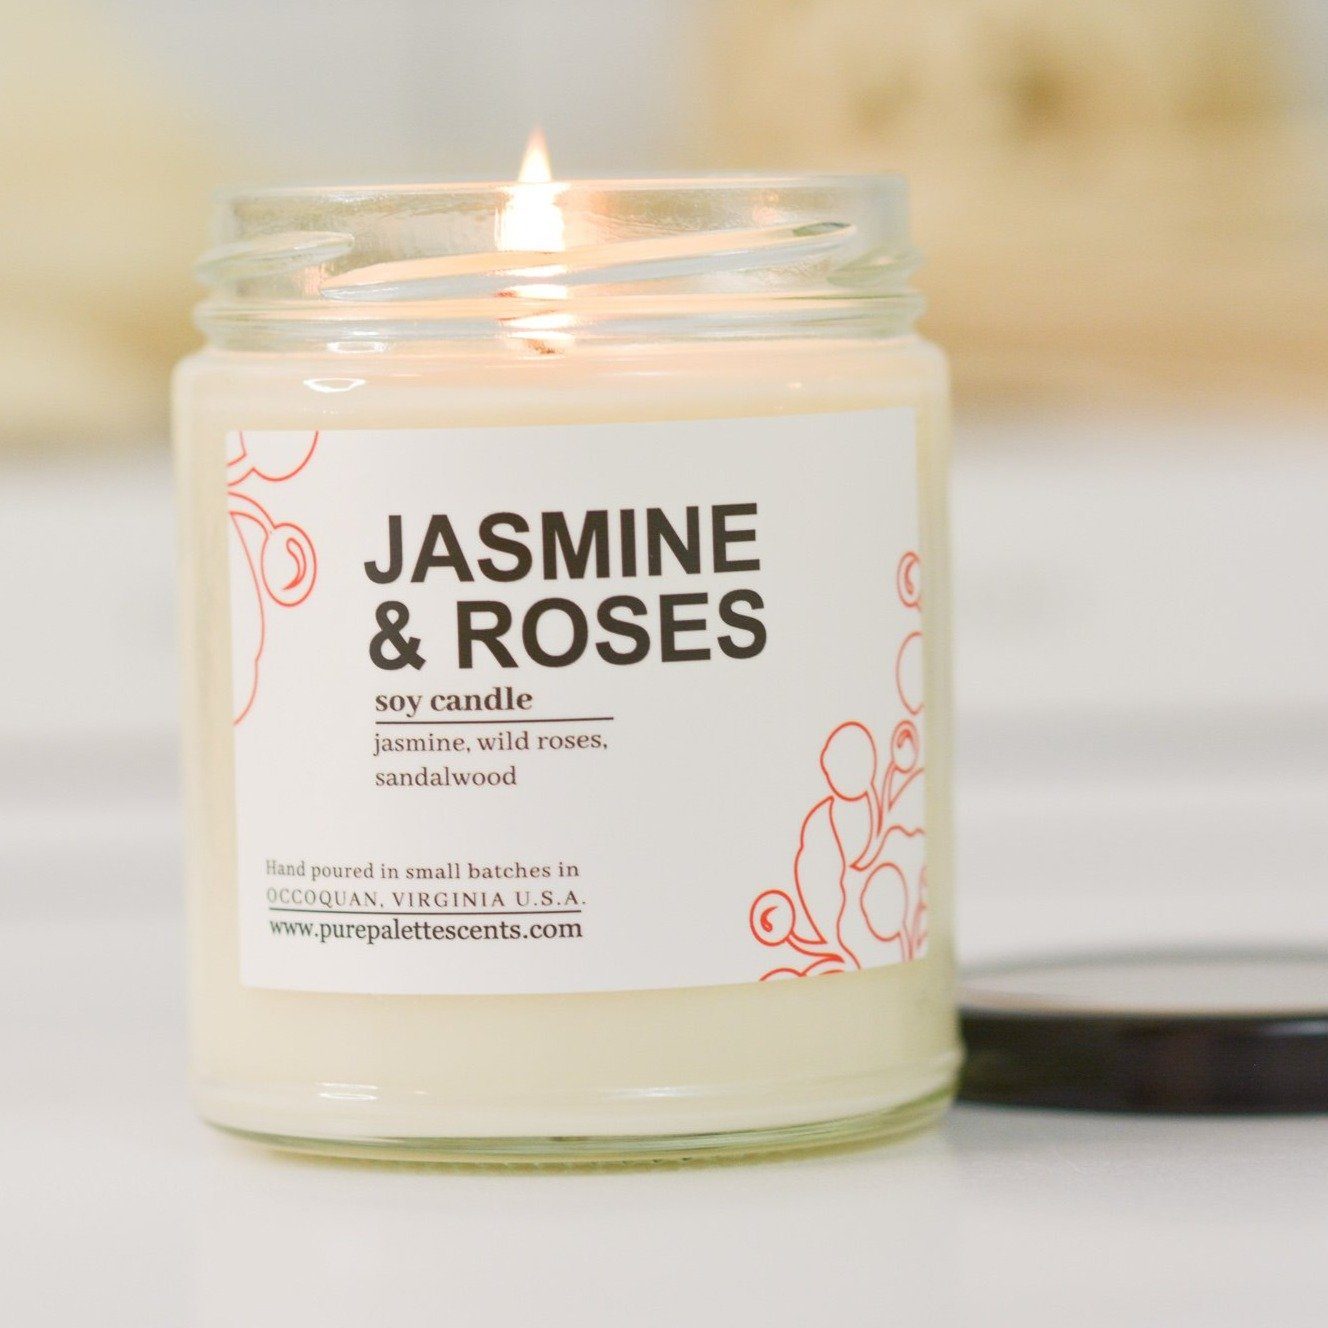  Aromatherapy Organic Jasmine & Rose Natural Soy Wax Candle, Dry Flowers Scented, 100% Pure Essential Oil, Gift for Your Partner, Home Decor, Relax Your Mind